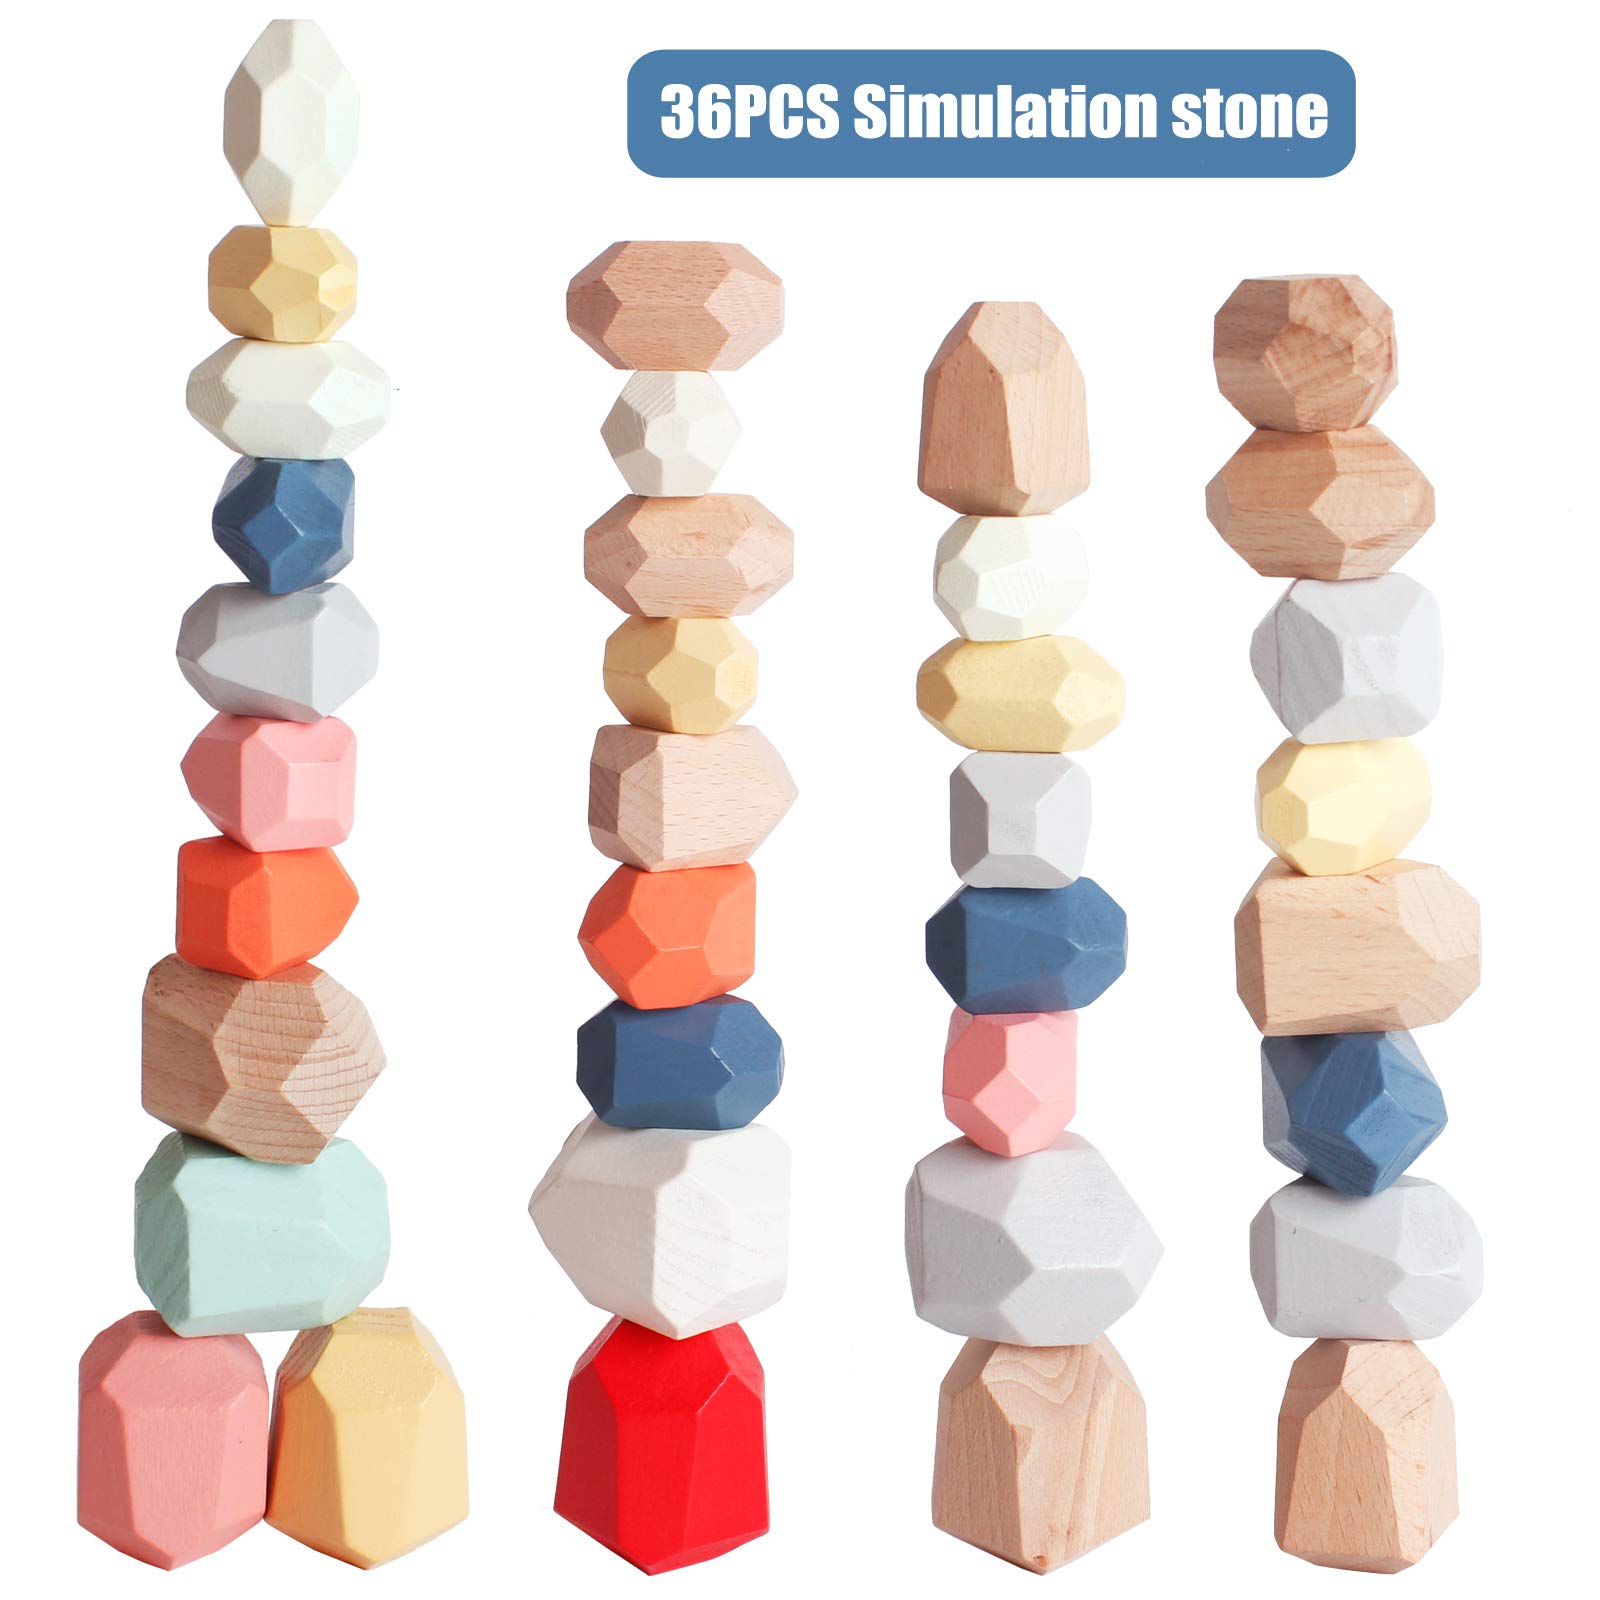 BESTAMTOY 36 PCS Wooden Sorting Stacking Rocks Stones,Safe for Ages 1+,Toddler Toys Learning Montessori Toys, Building Blocks Game for Kids 2 3 4 5 6 Years Boy and Girl Birthday Gifts for Kids